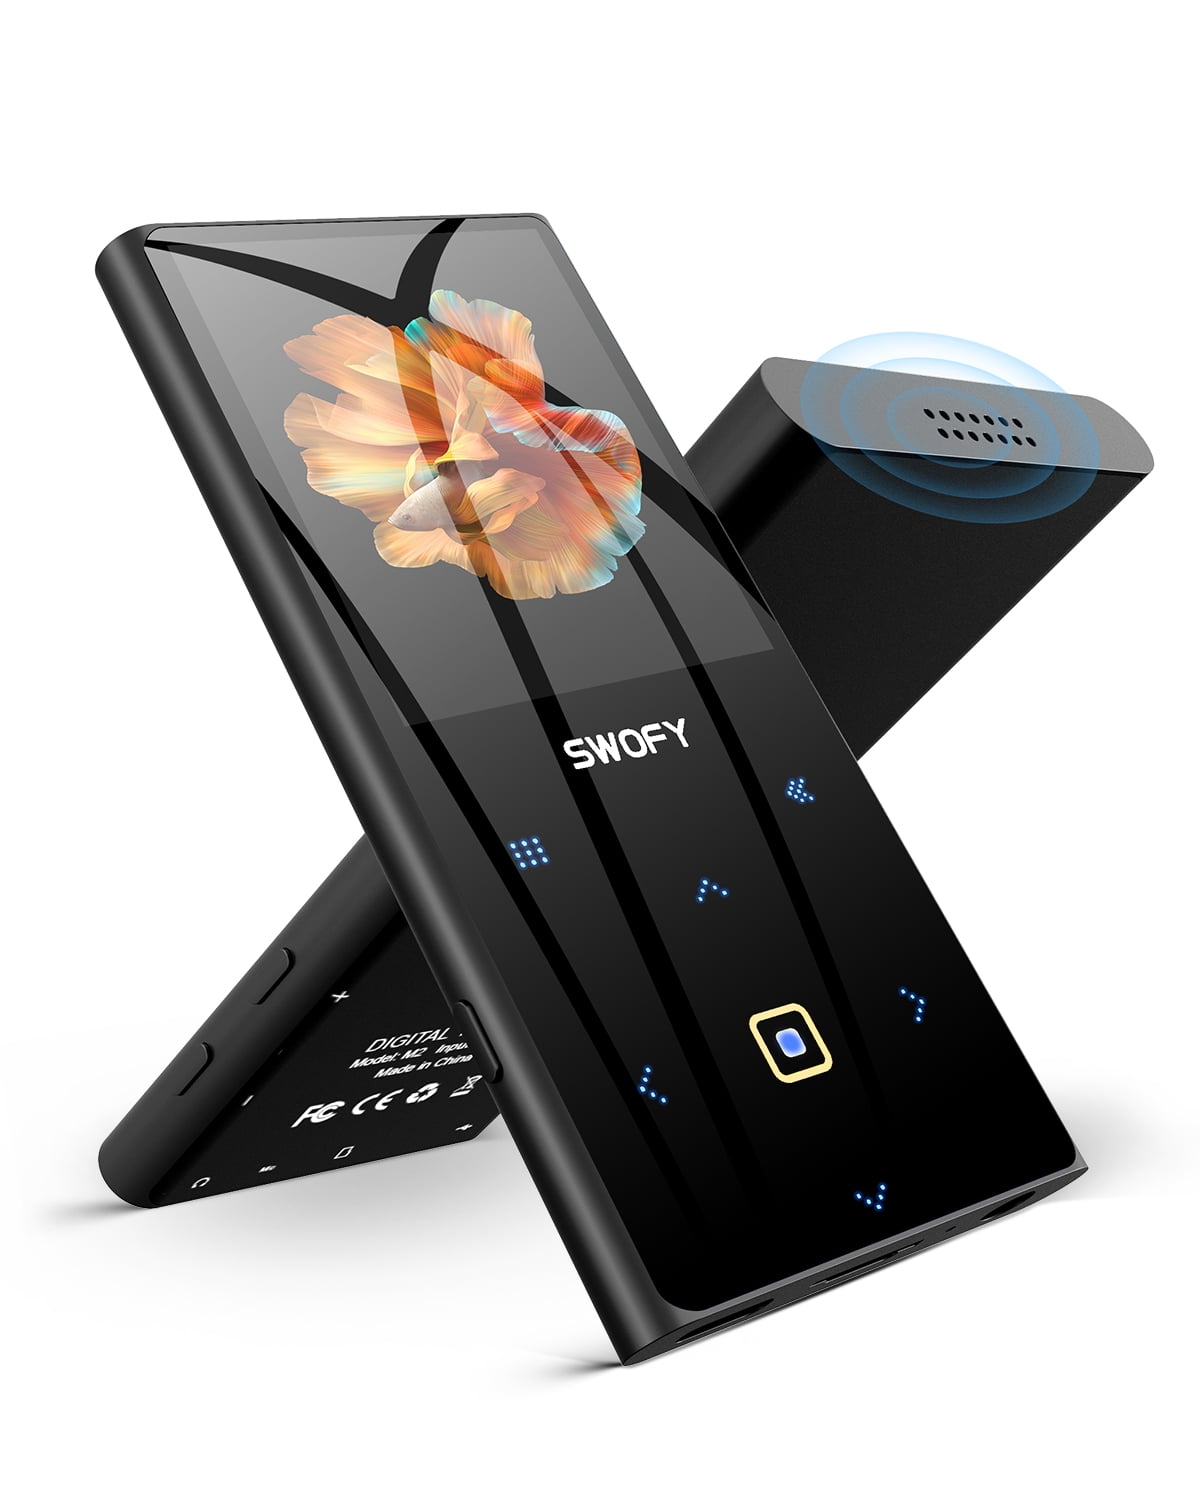 Streven Kapper Zoek machine optimalisatie 32GB Mp3 Player with Bluetooth 5.0, SWOFY Portable Digital Lossless HiFi  Audio Music Player with HD Speaker, 2.4 in Curved Screen - Walmart.com